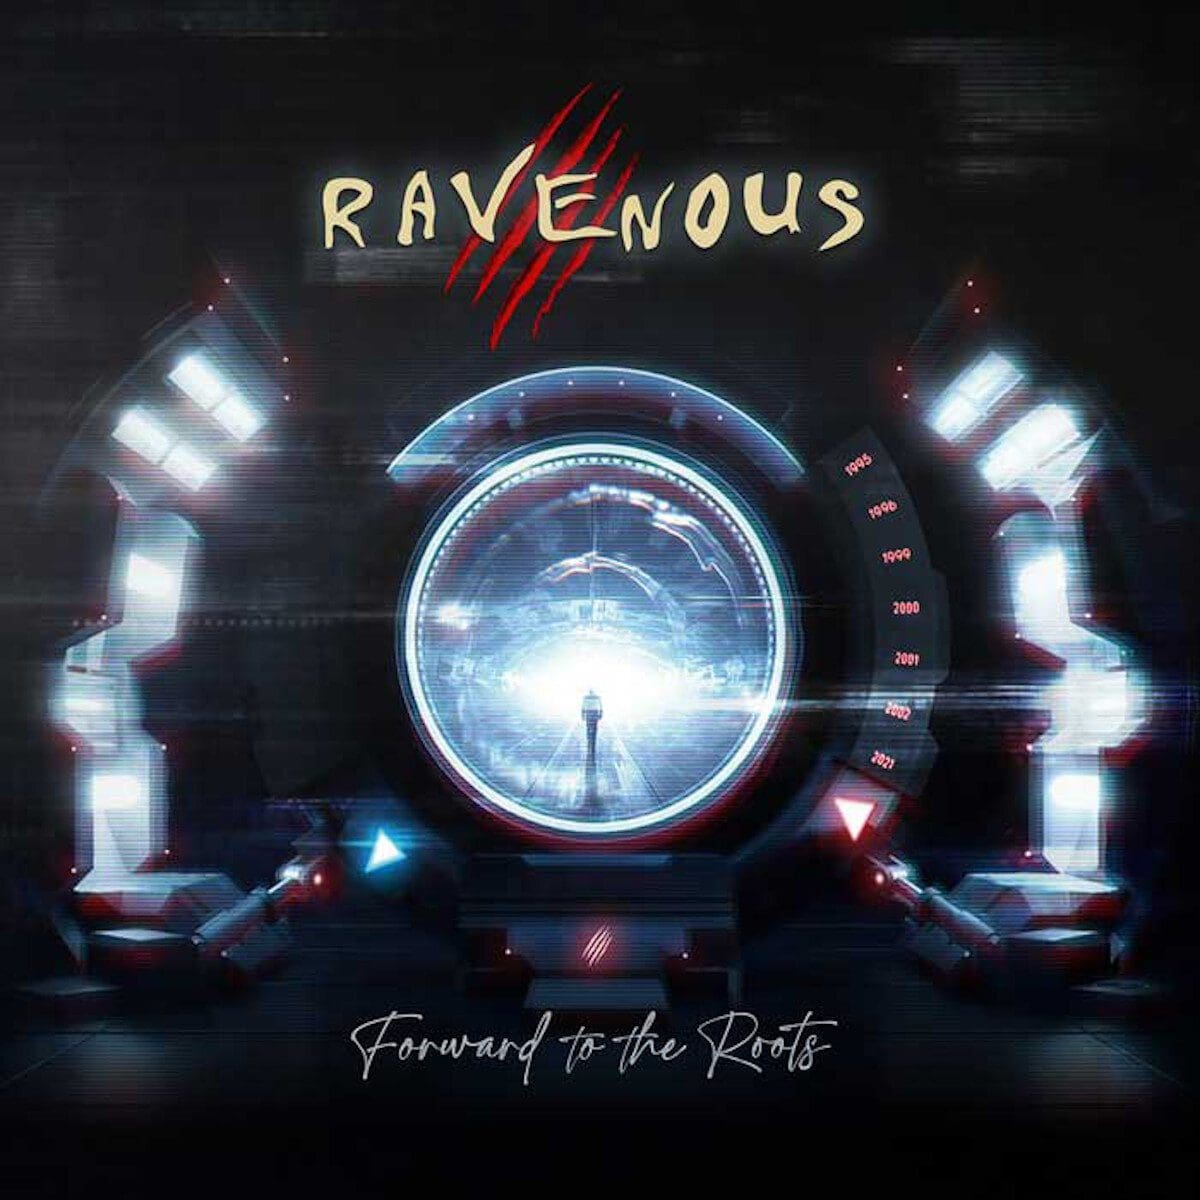 Out via Repo Records is the first new Ravenous album in 21 years